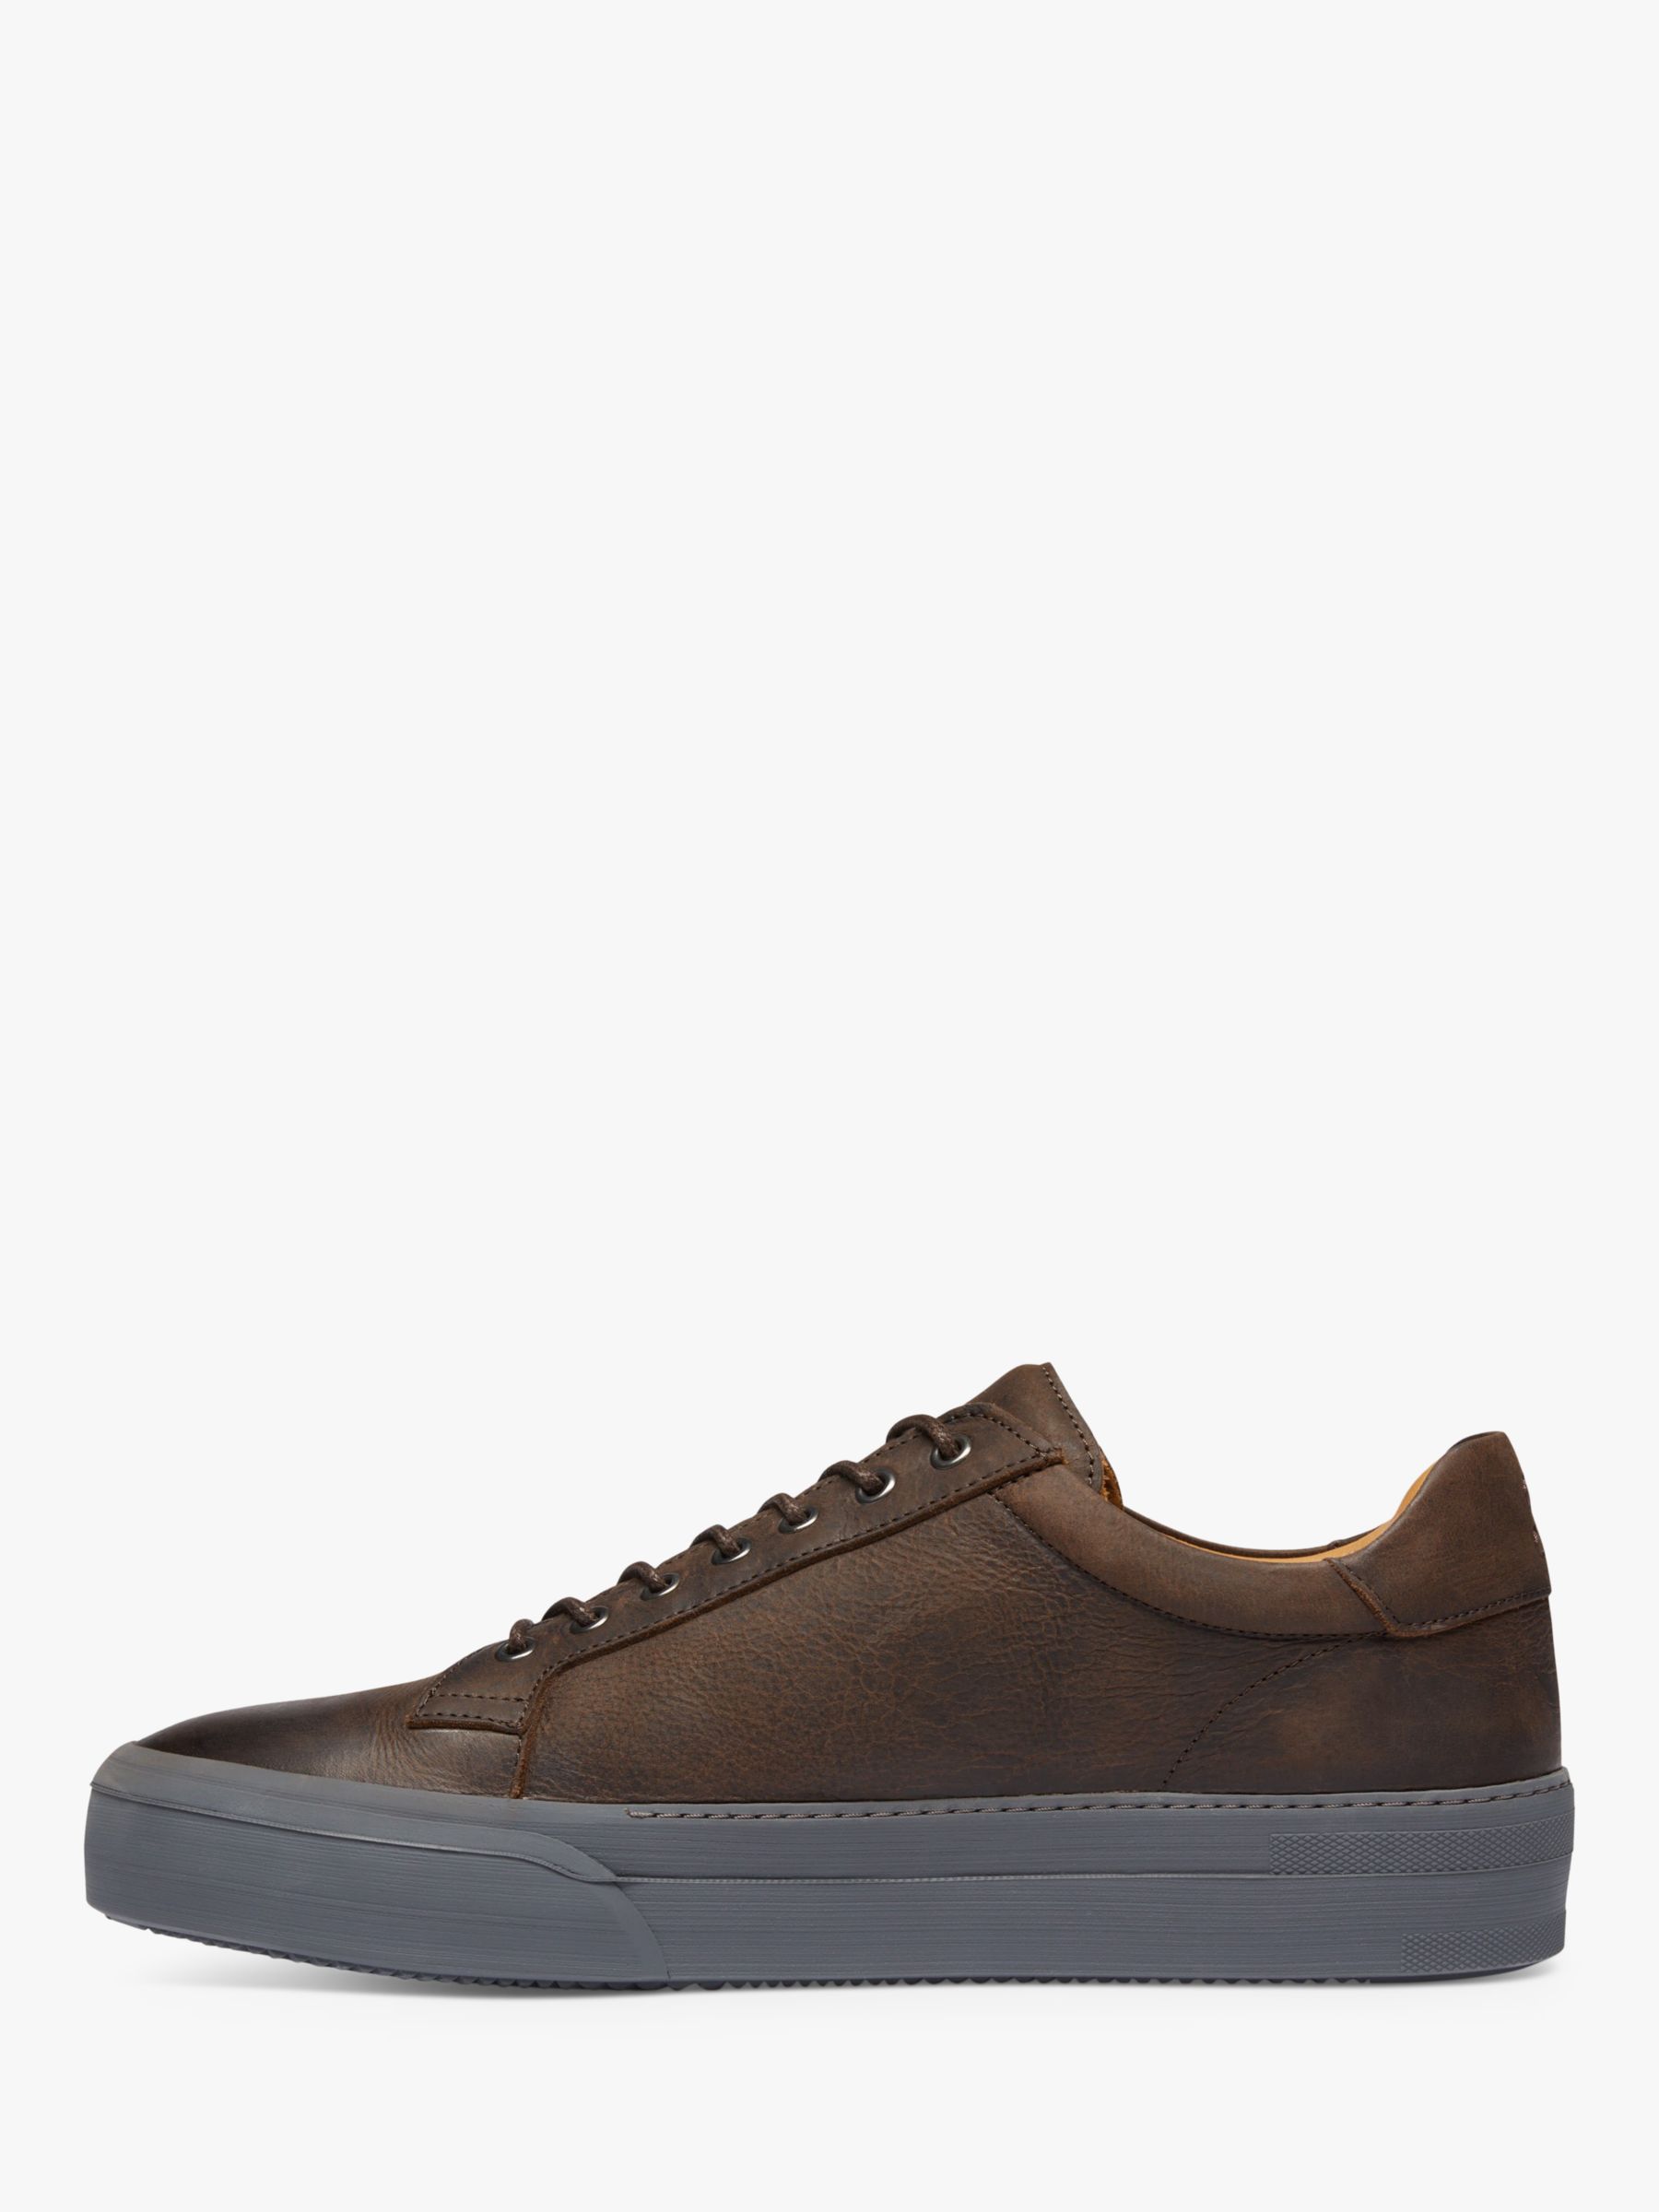 Buy Oliver Sweeney Penacova Leather Lace Up Trainers, Brown Online at johnlewis.com